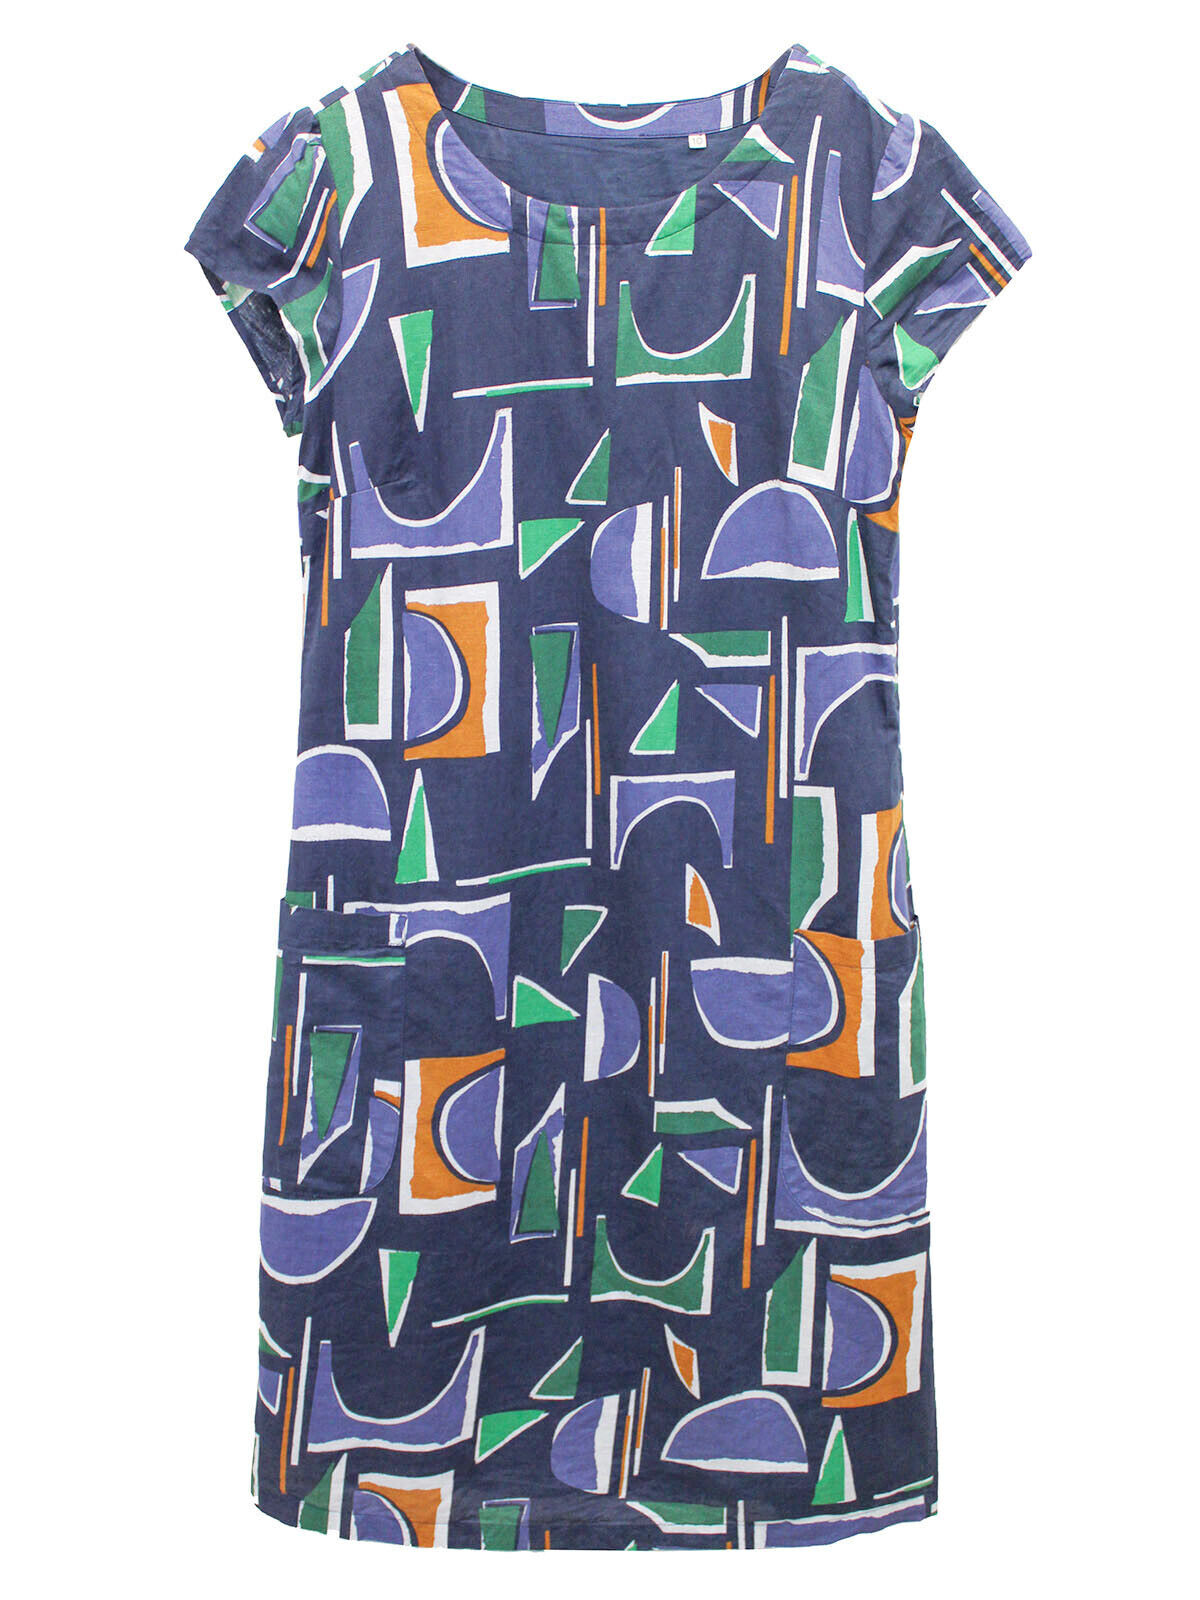 EX Seasalt Navy Wood Collage River Cove Shift Dress 10 12 14 16 20 22 24 RRP £70